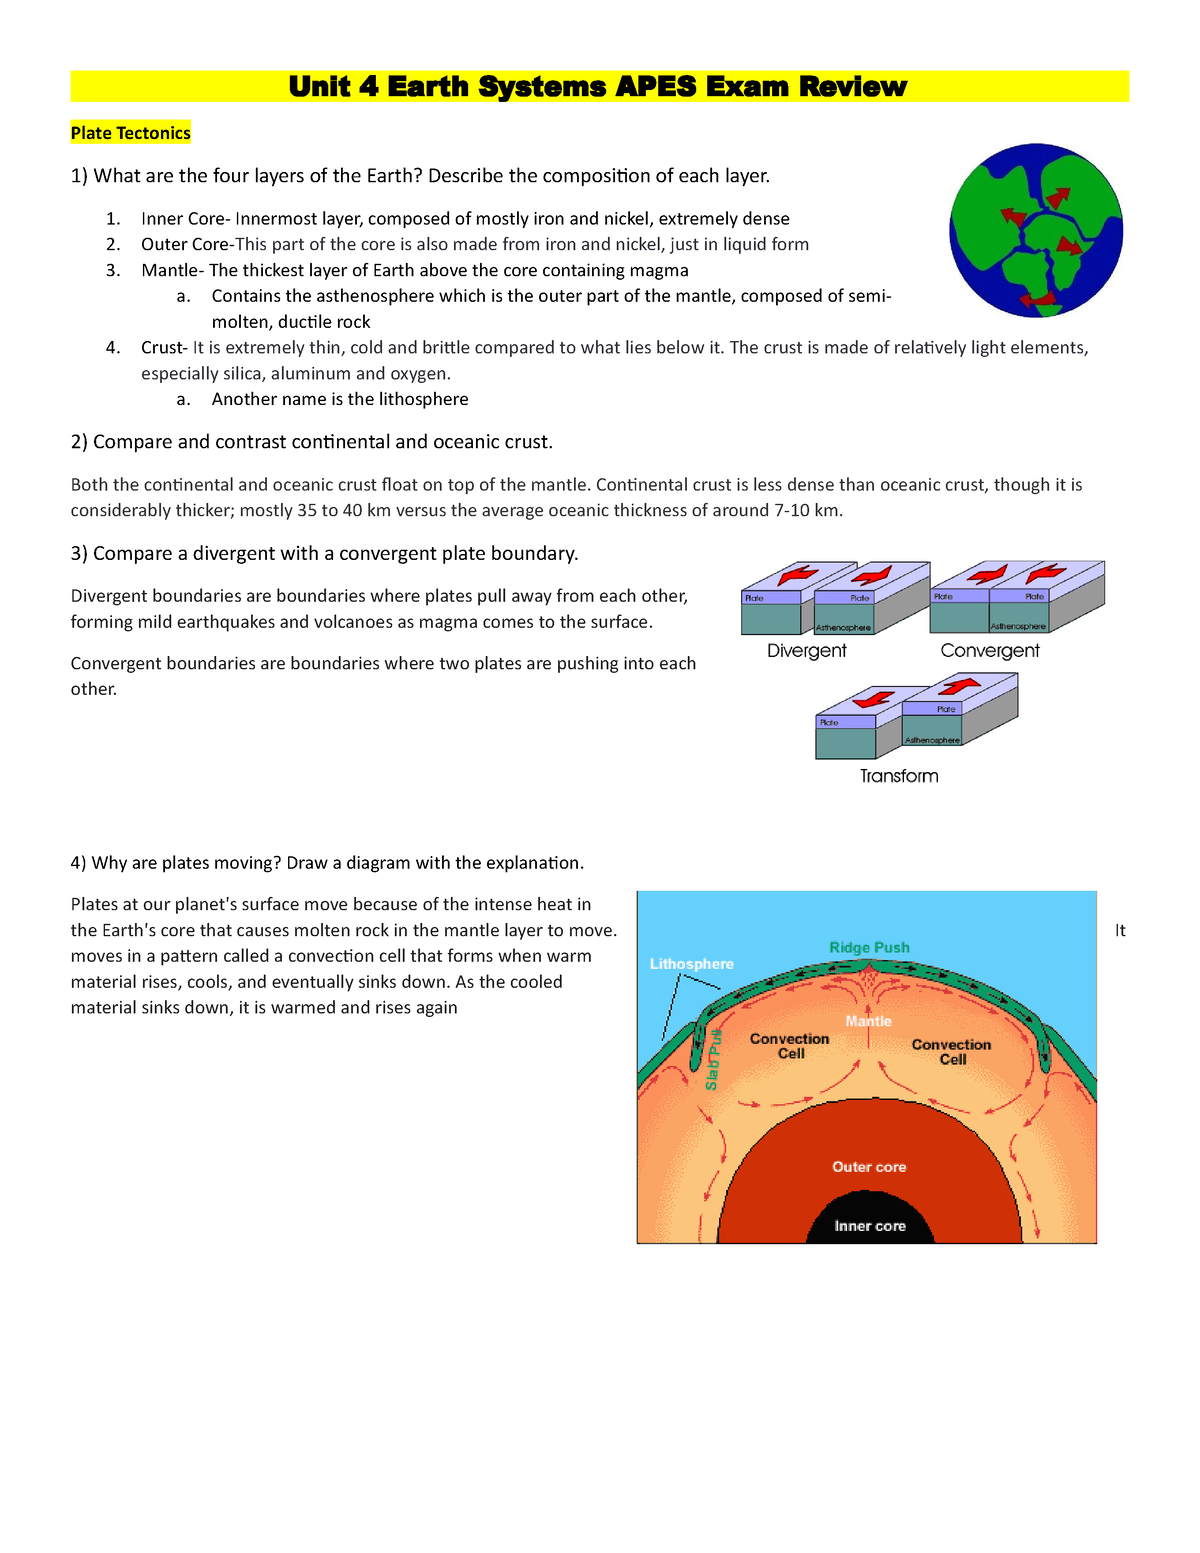 Unit 4 Earth Systems Ap Exam Review Answer Unit 4 Earth Systems APES